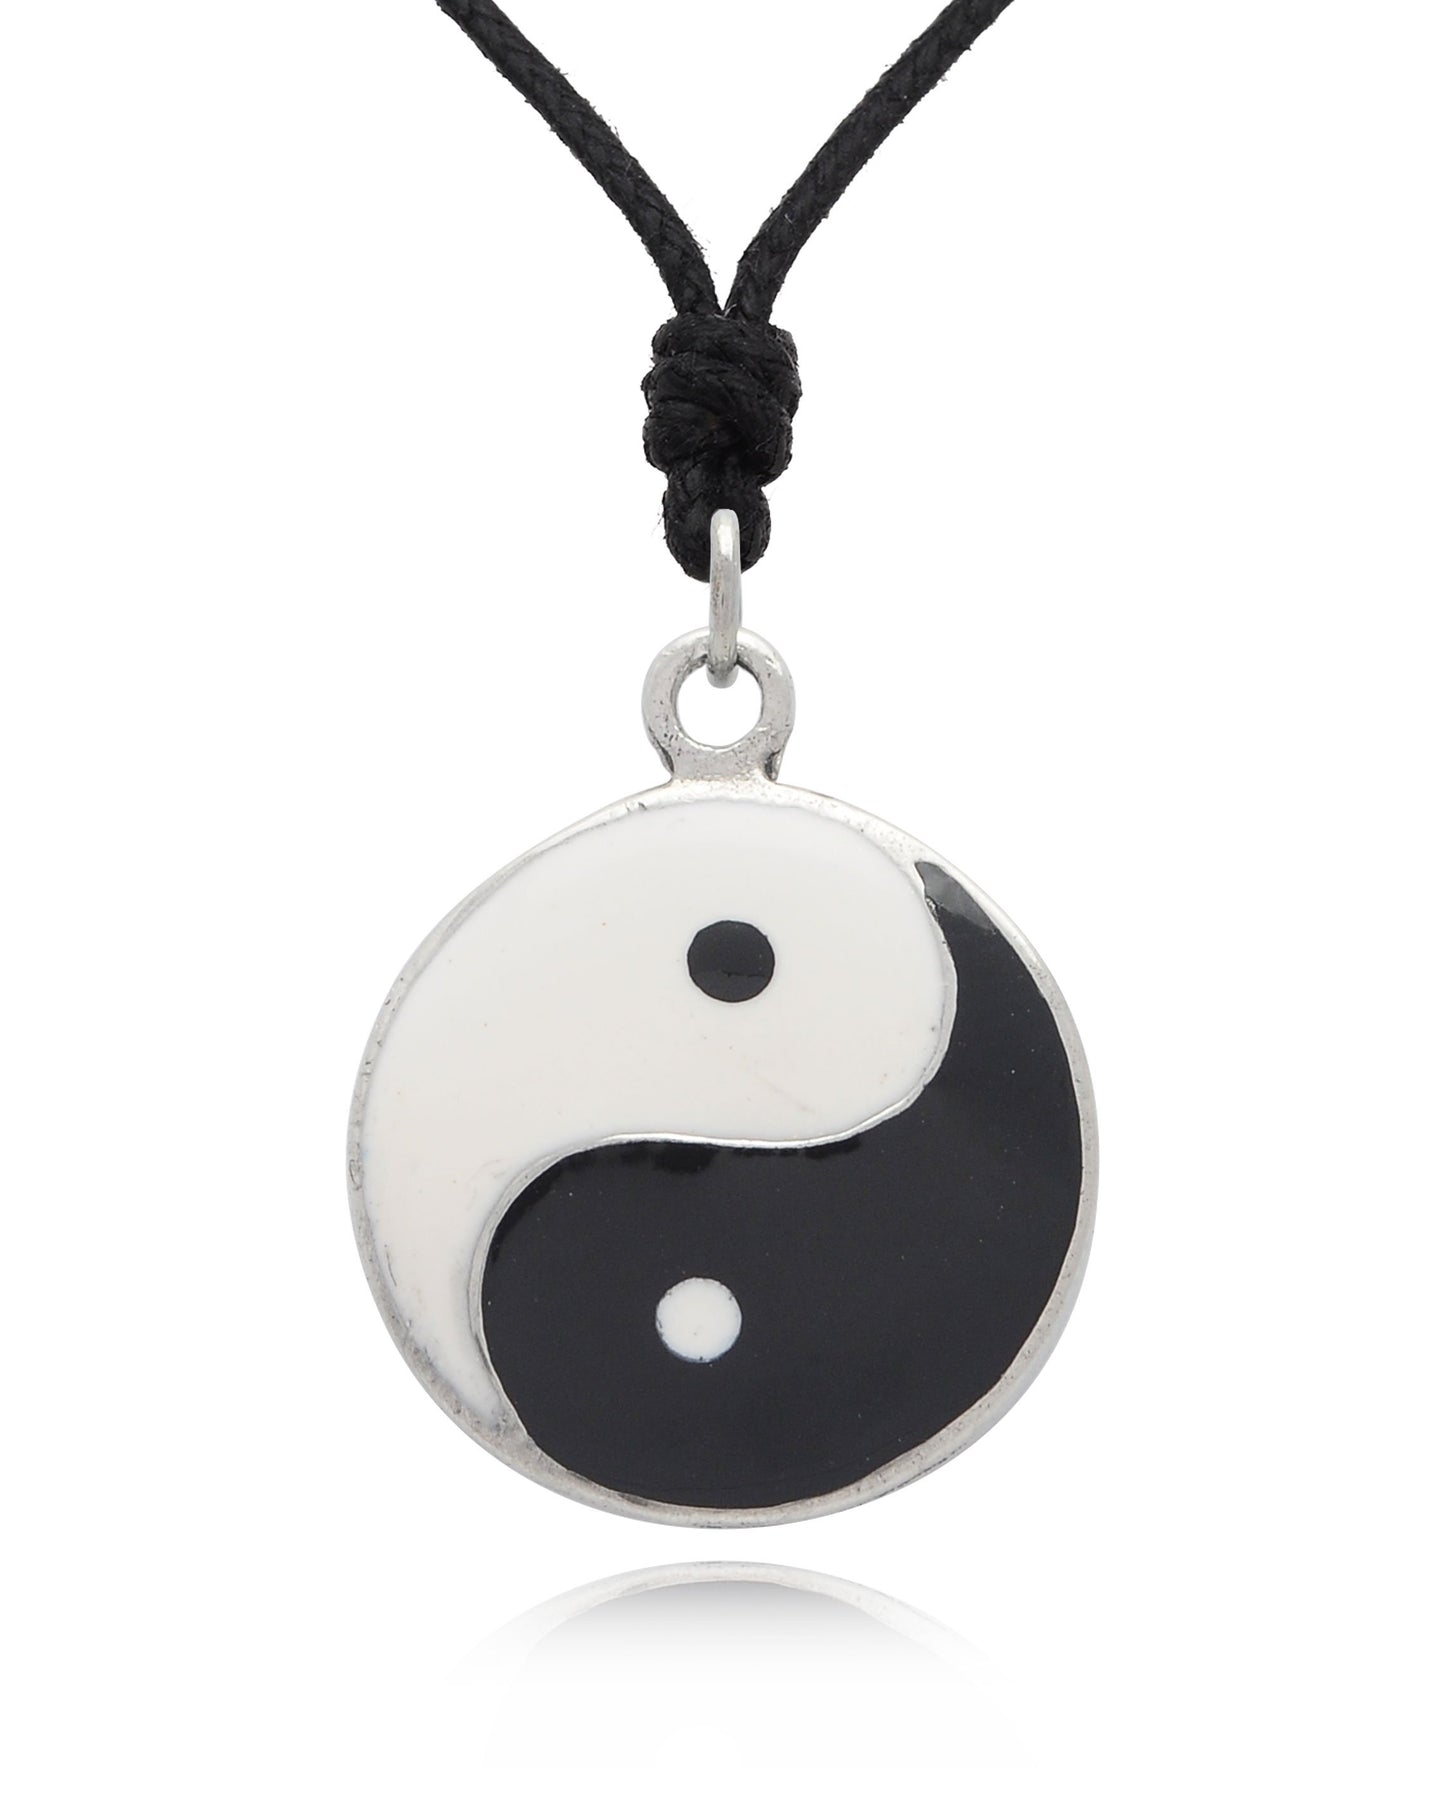 Yin Yang Japanese 92.5 Sterling Silver Charm Necklace Pendant Jewelry